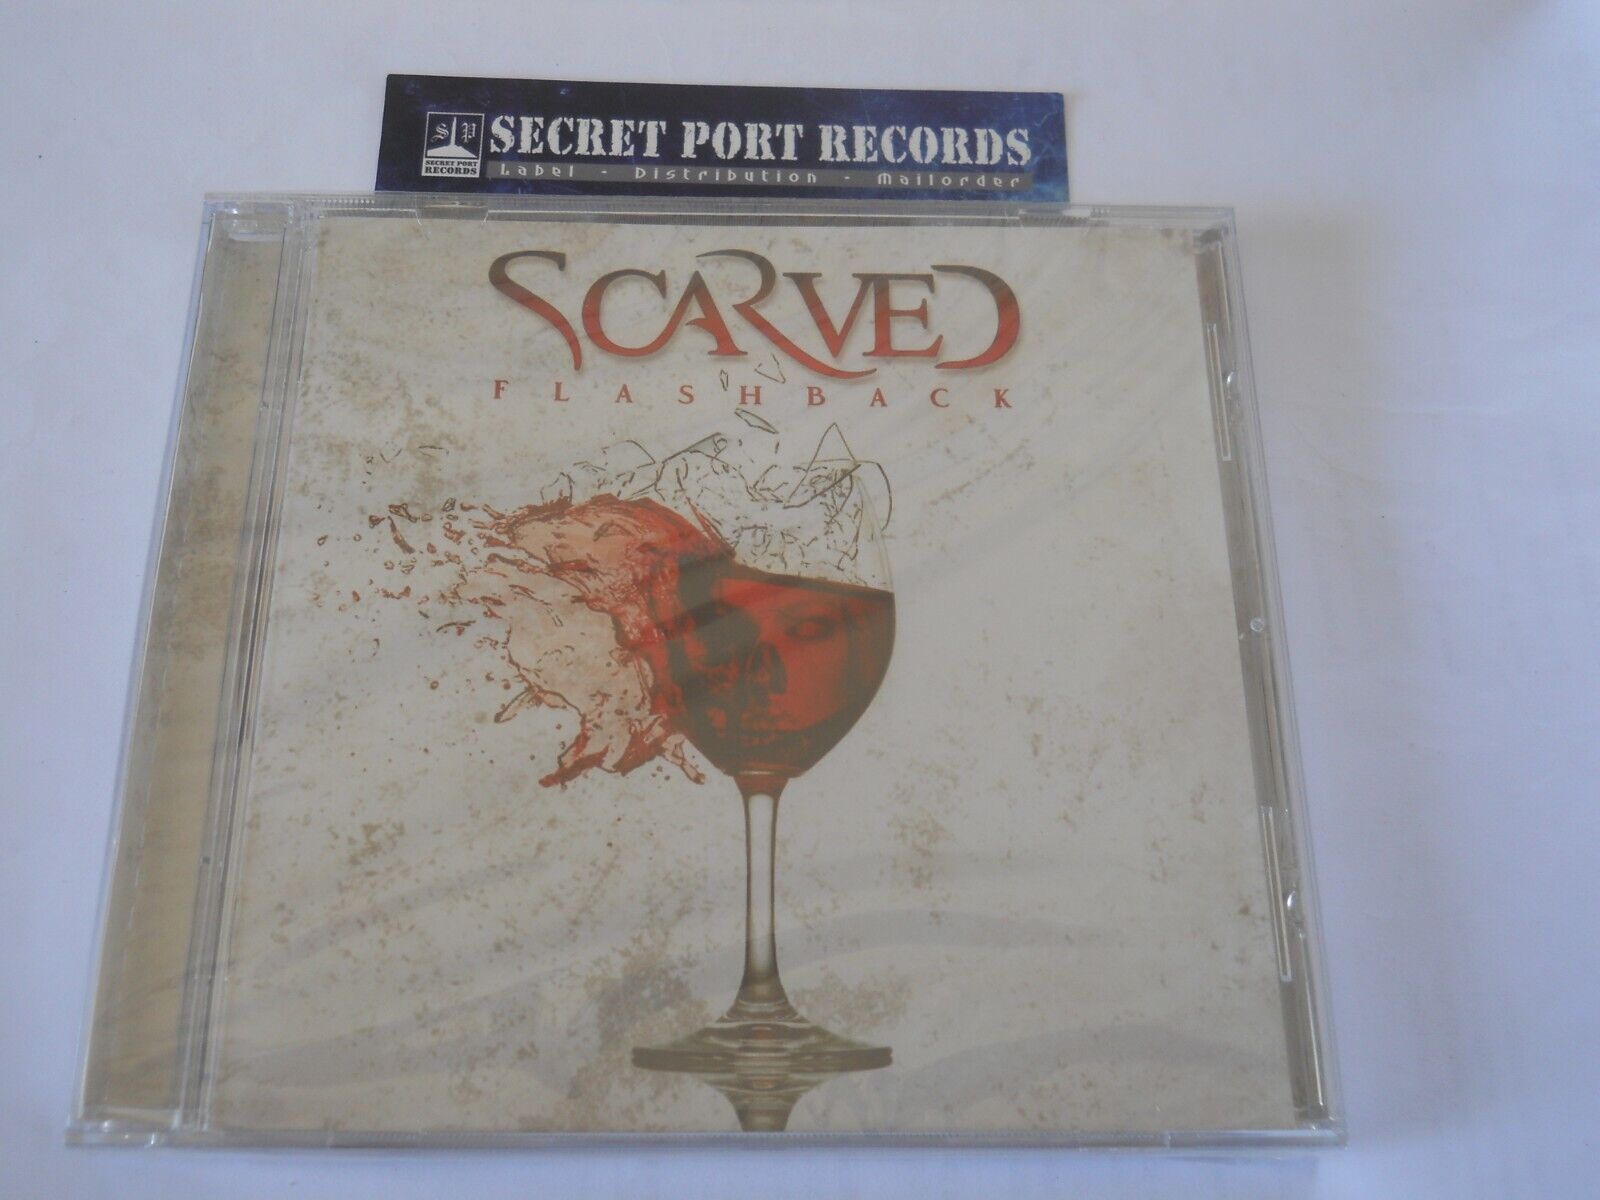 Scarved–FlashbackSEALED2021CD,Scorpions,Thin Lizzy,Female fronted hard rock